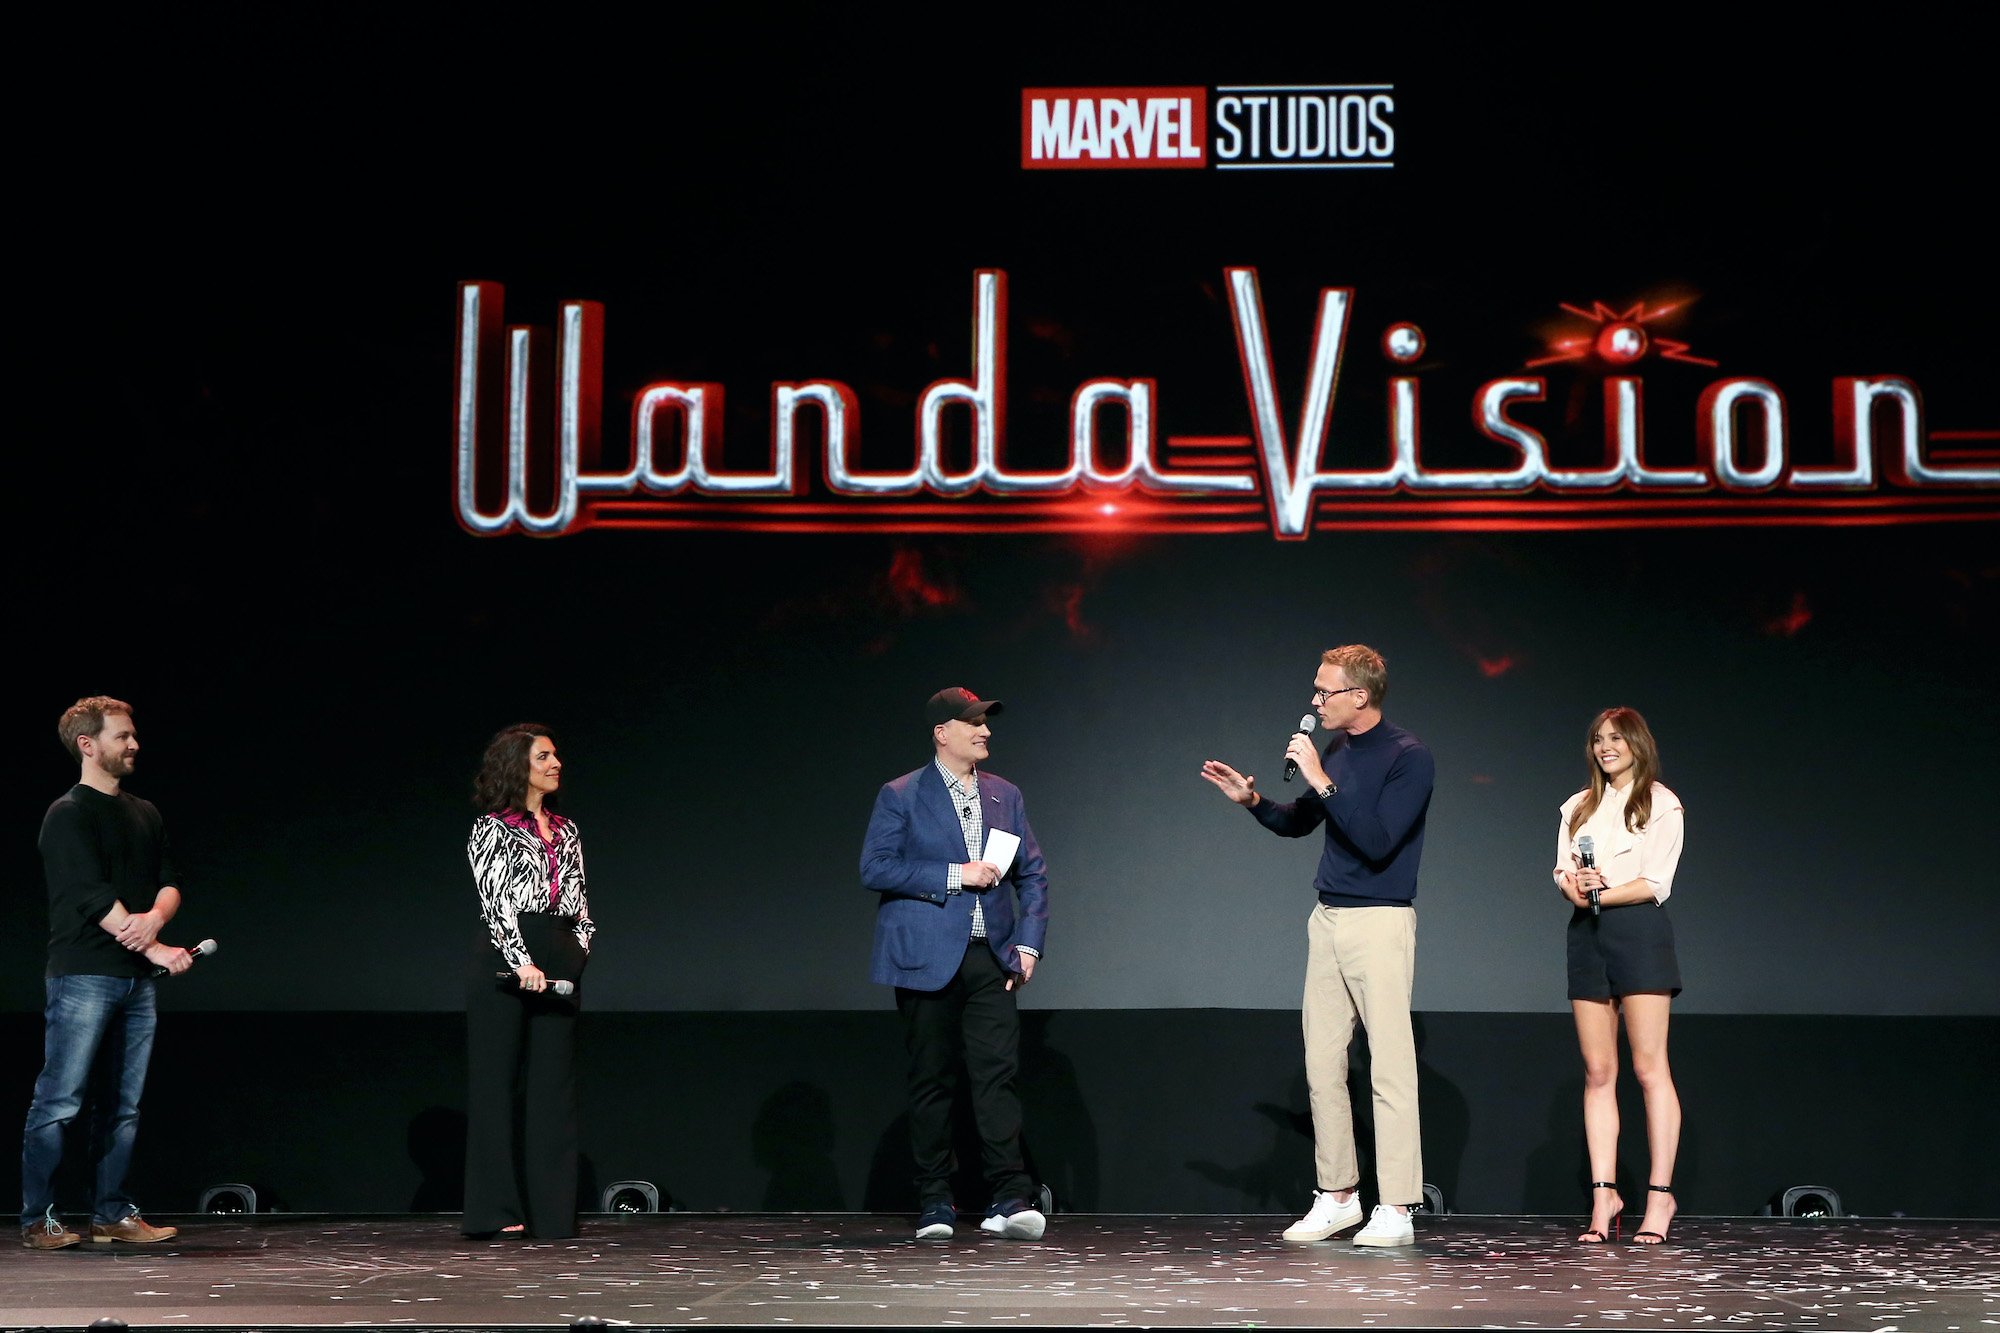 The cast and crew of 'WandaVision' present the new show onstage